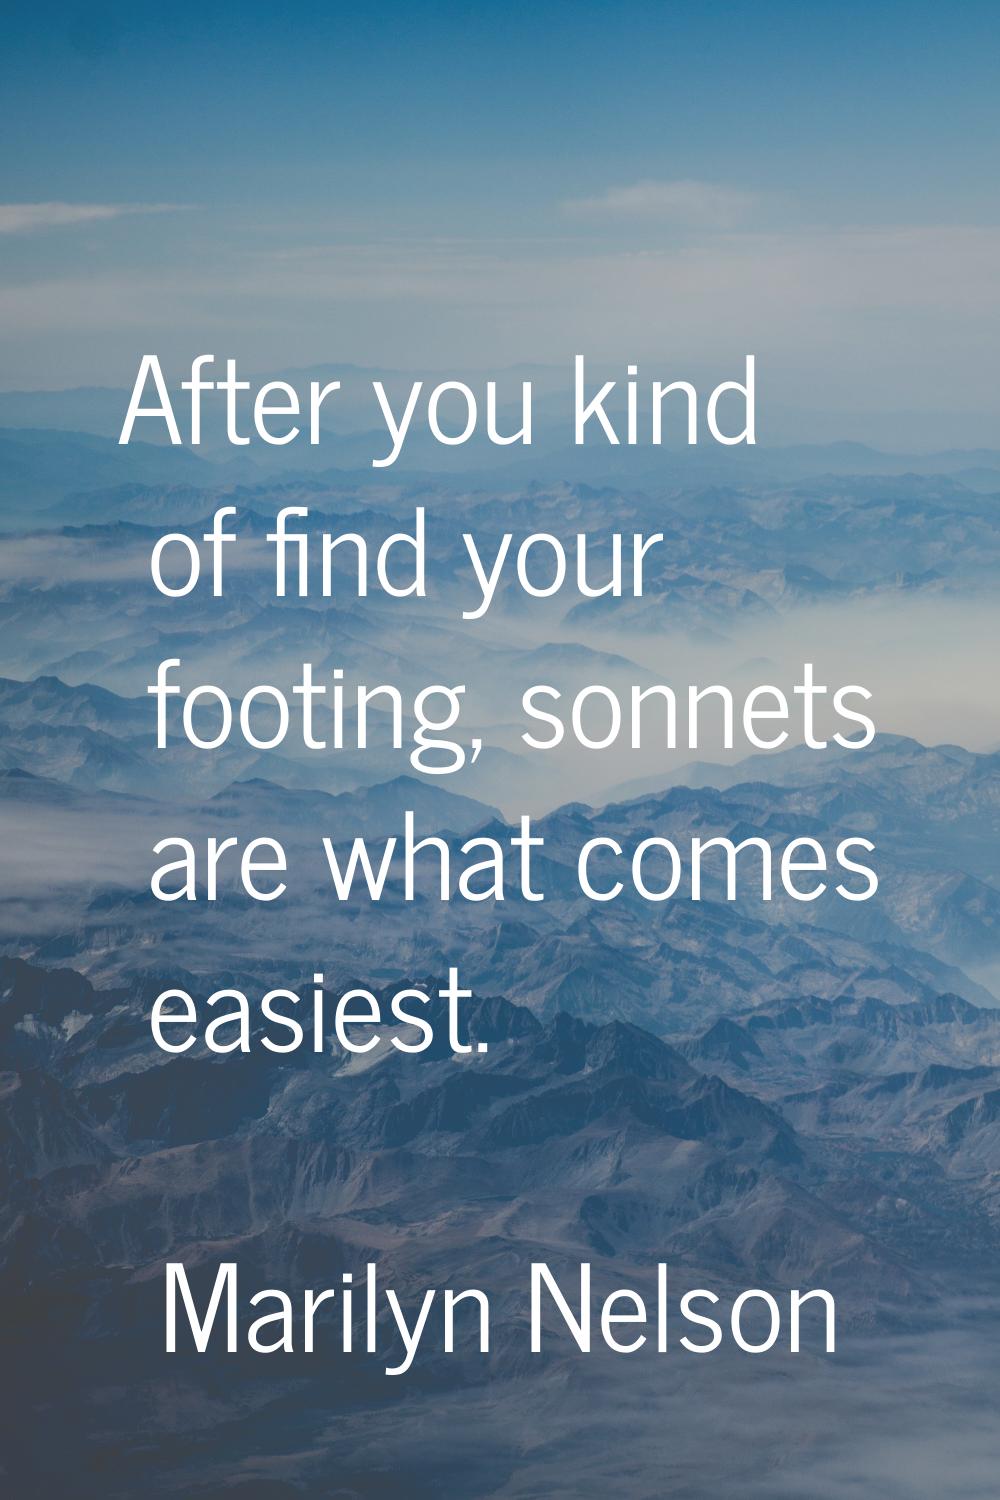 After you kind of find your footing, sonnets are what comes easiest.